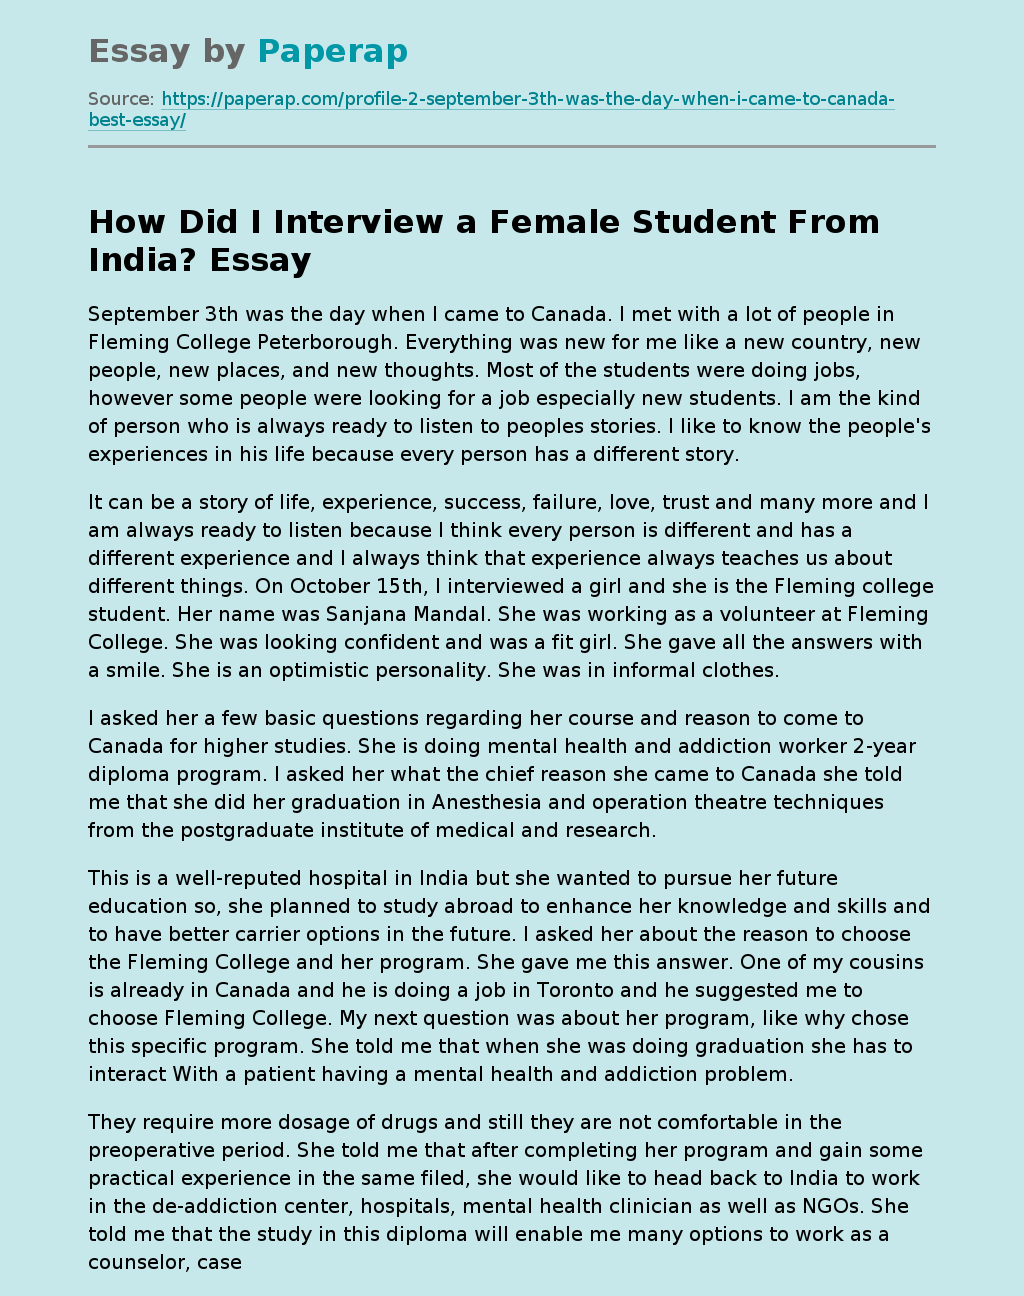 How Did I Interview a Female Student From India?